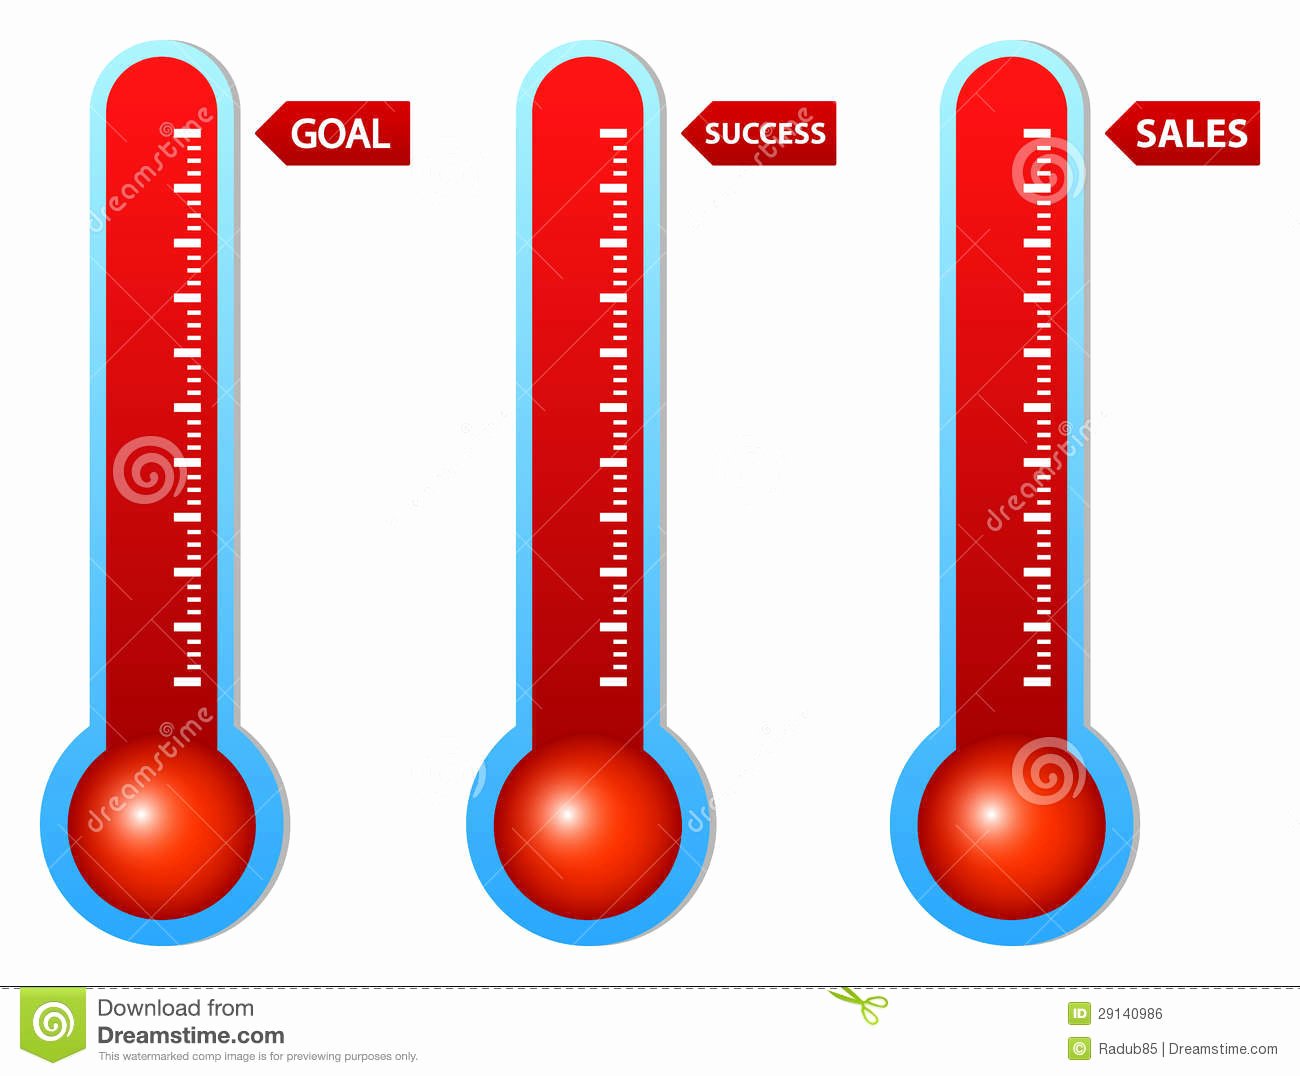 Fundraising thermometer Image Beautiful Fundraising thermometer Printable